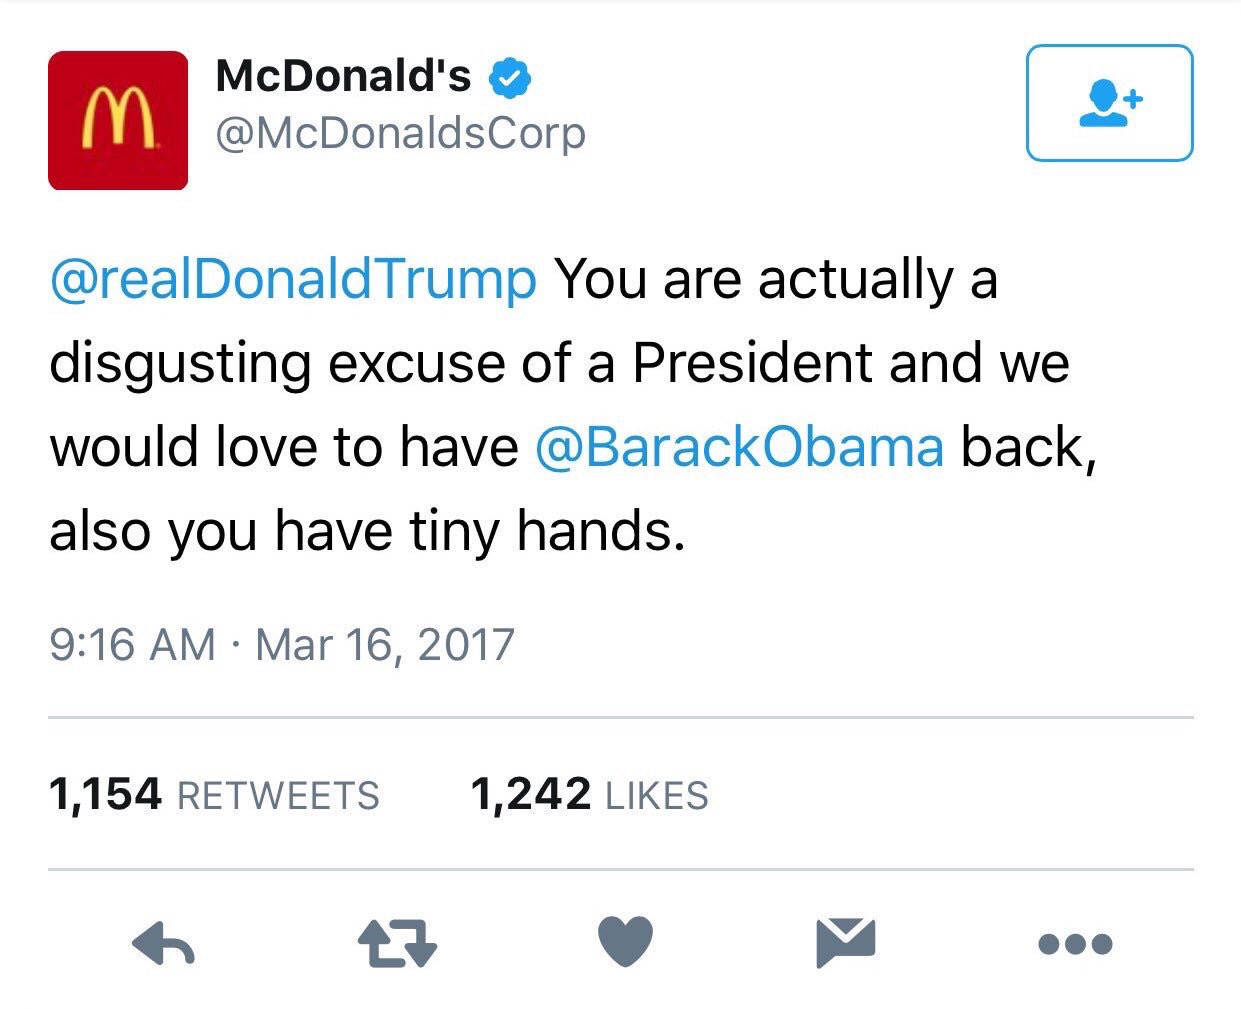 tweet - savage mcdonald's tweets - McDonald's Trump You are actually a disgusting excuse of a President and we would love to have back, also you have tiny hands. 1,154 1,242